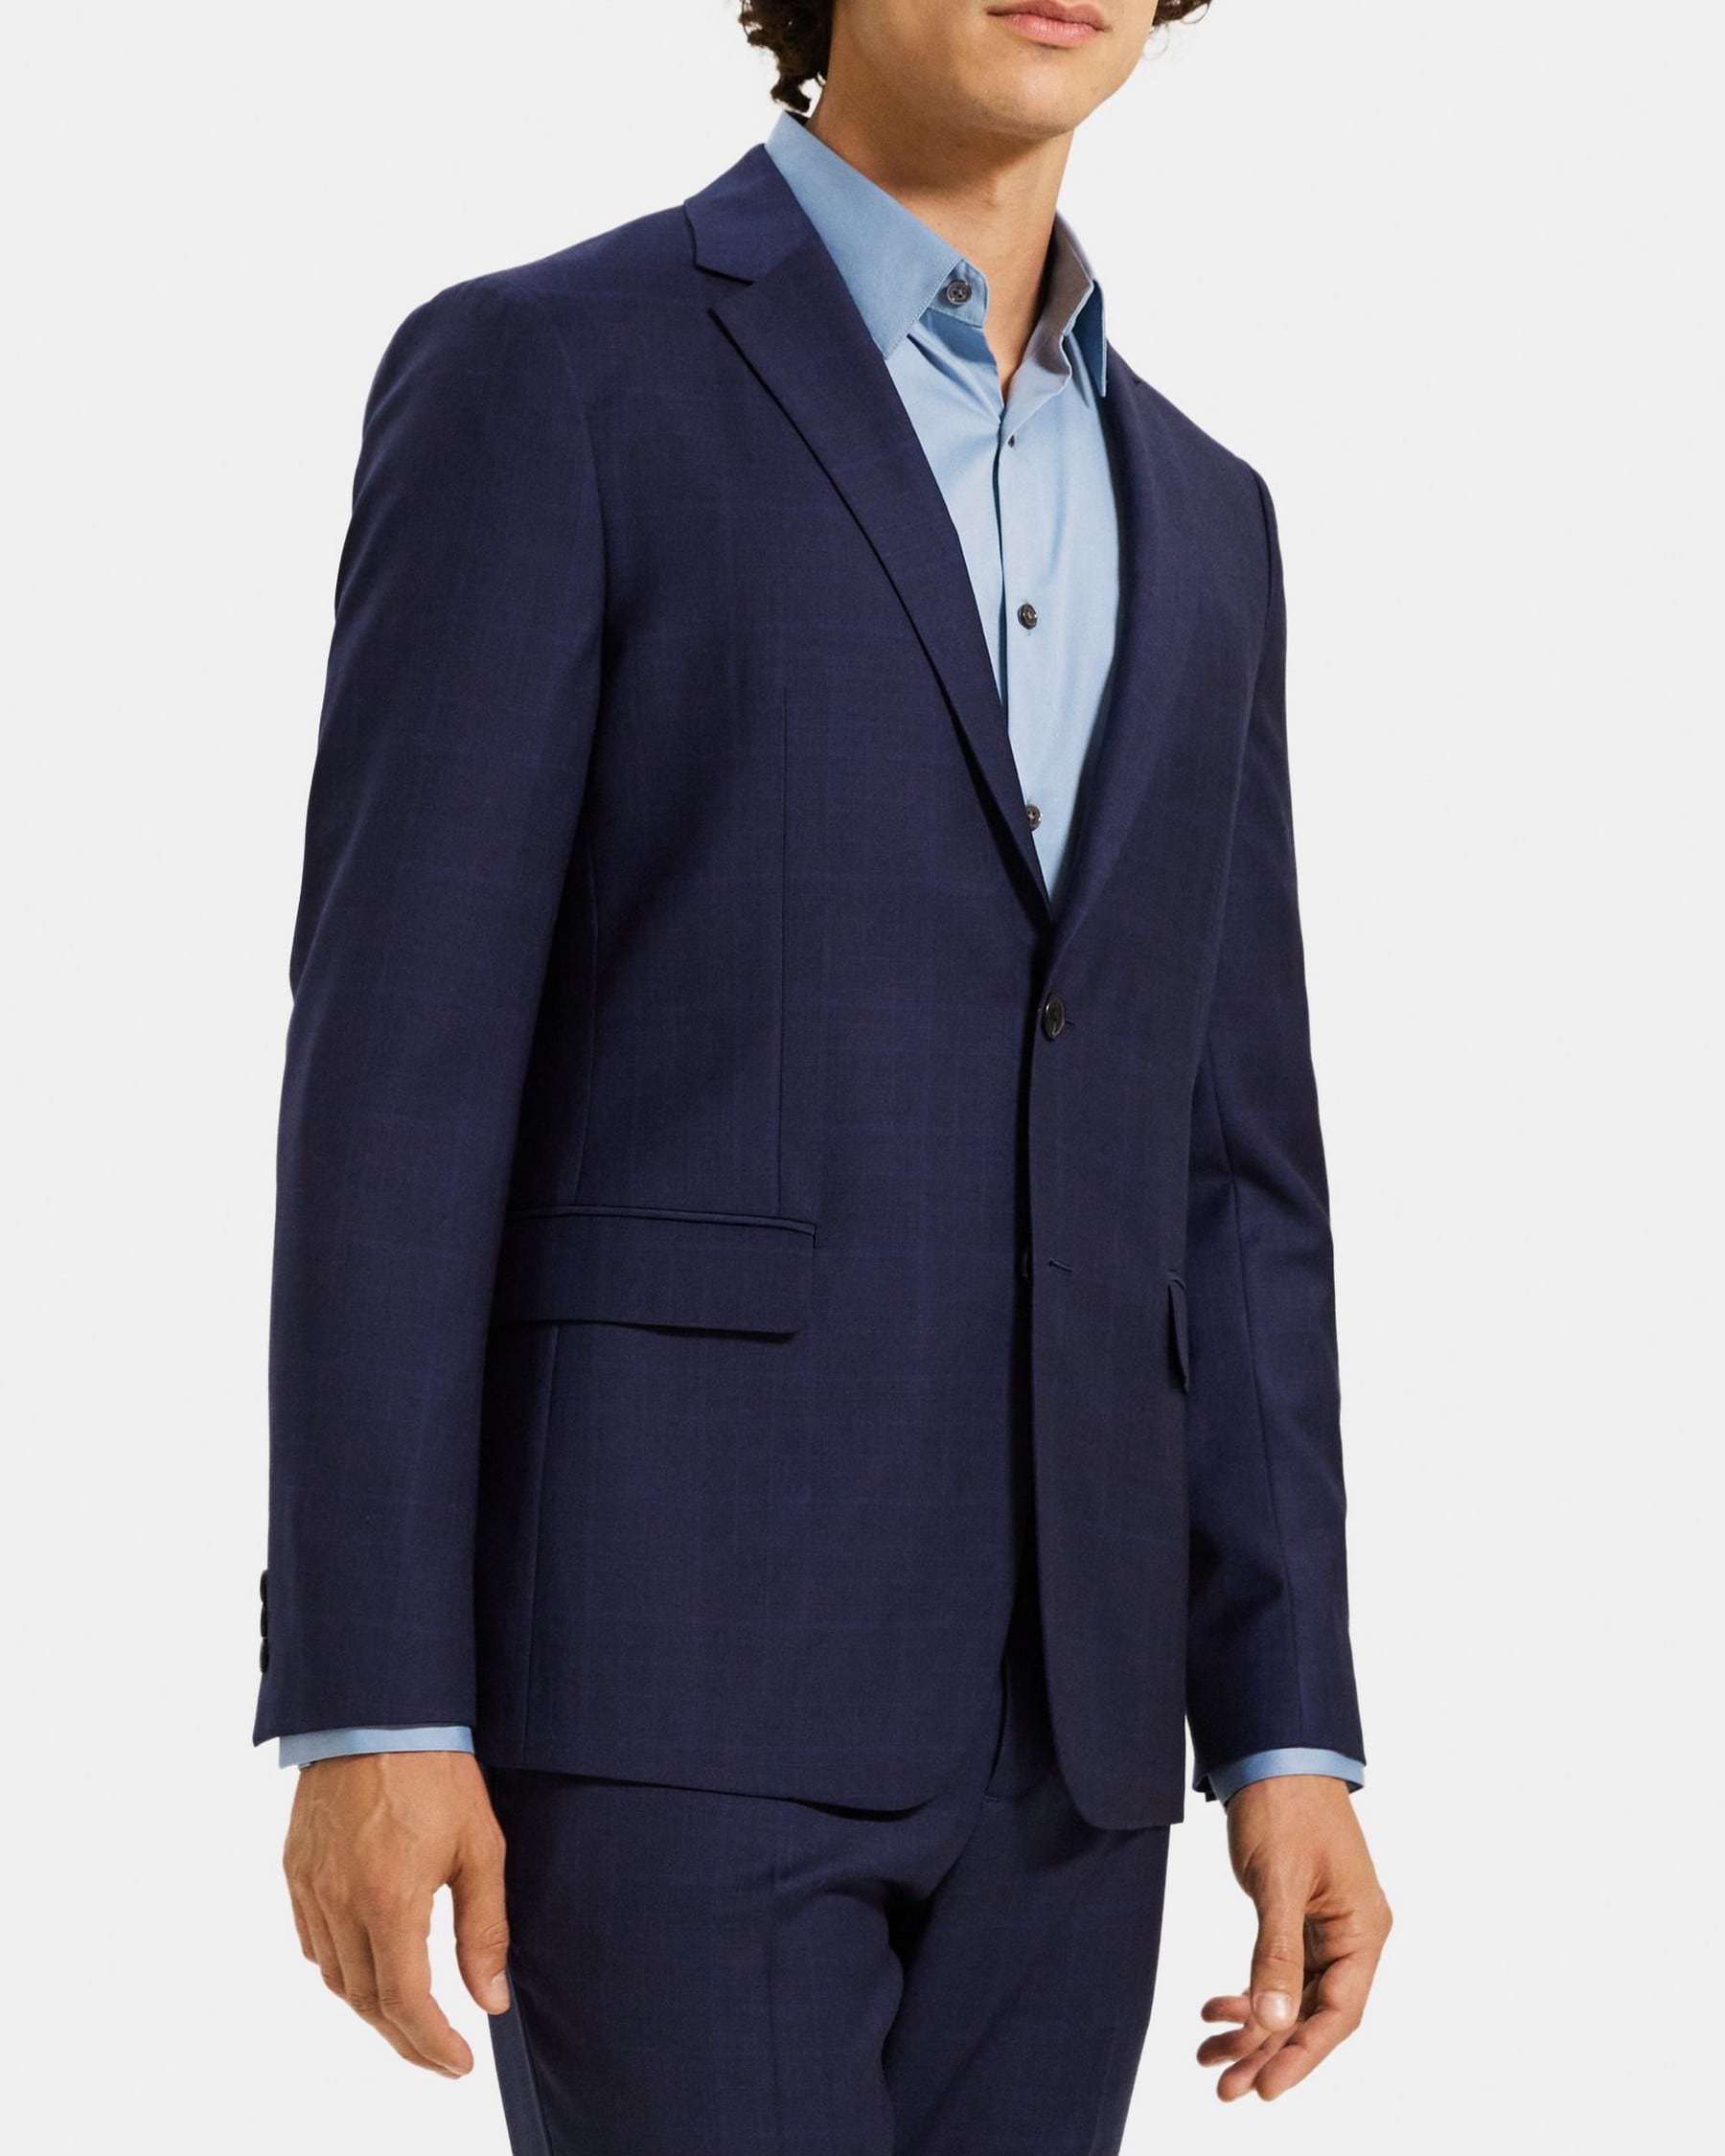 Unstructured Suit Jacket in Plaid Wool